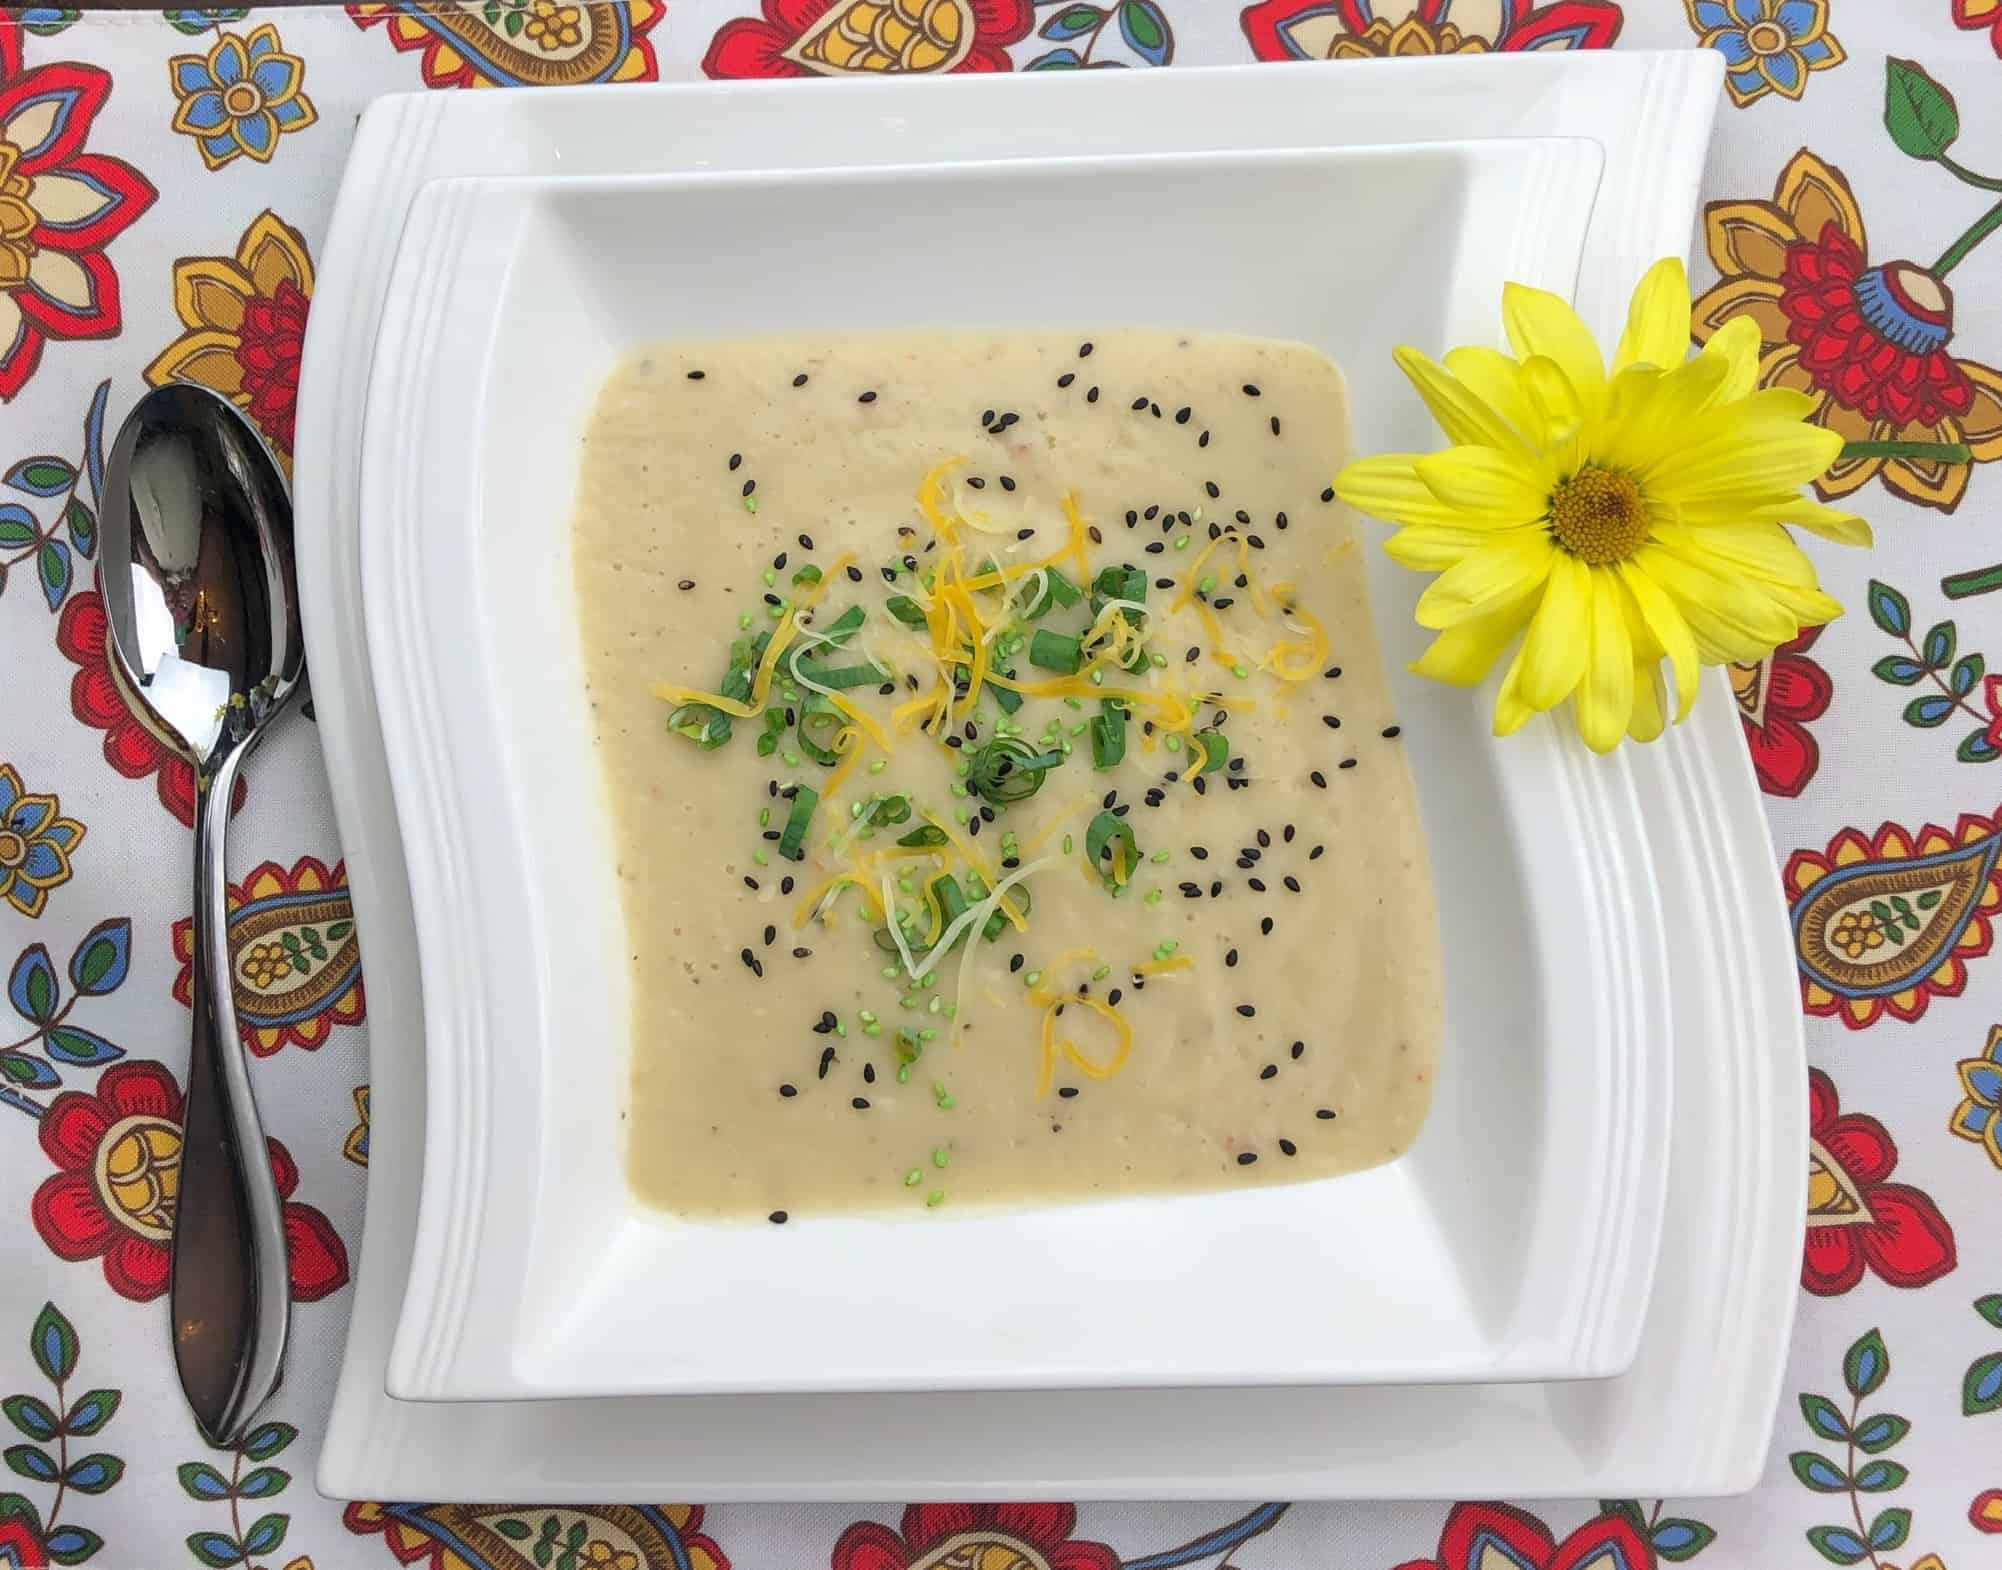 Cauliflower Bisque with chives shredded cheese and black sesame seeds in a white bowl with a yellow flower and a spoon on a printed tablecloth